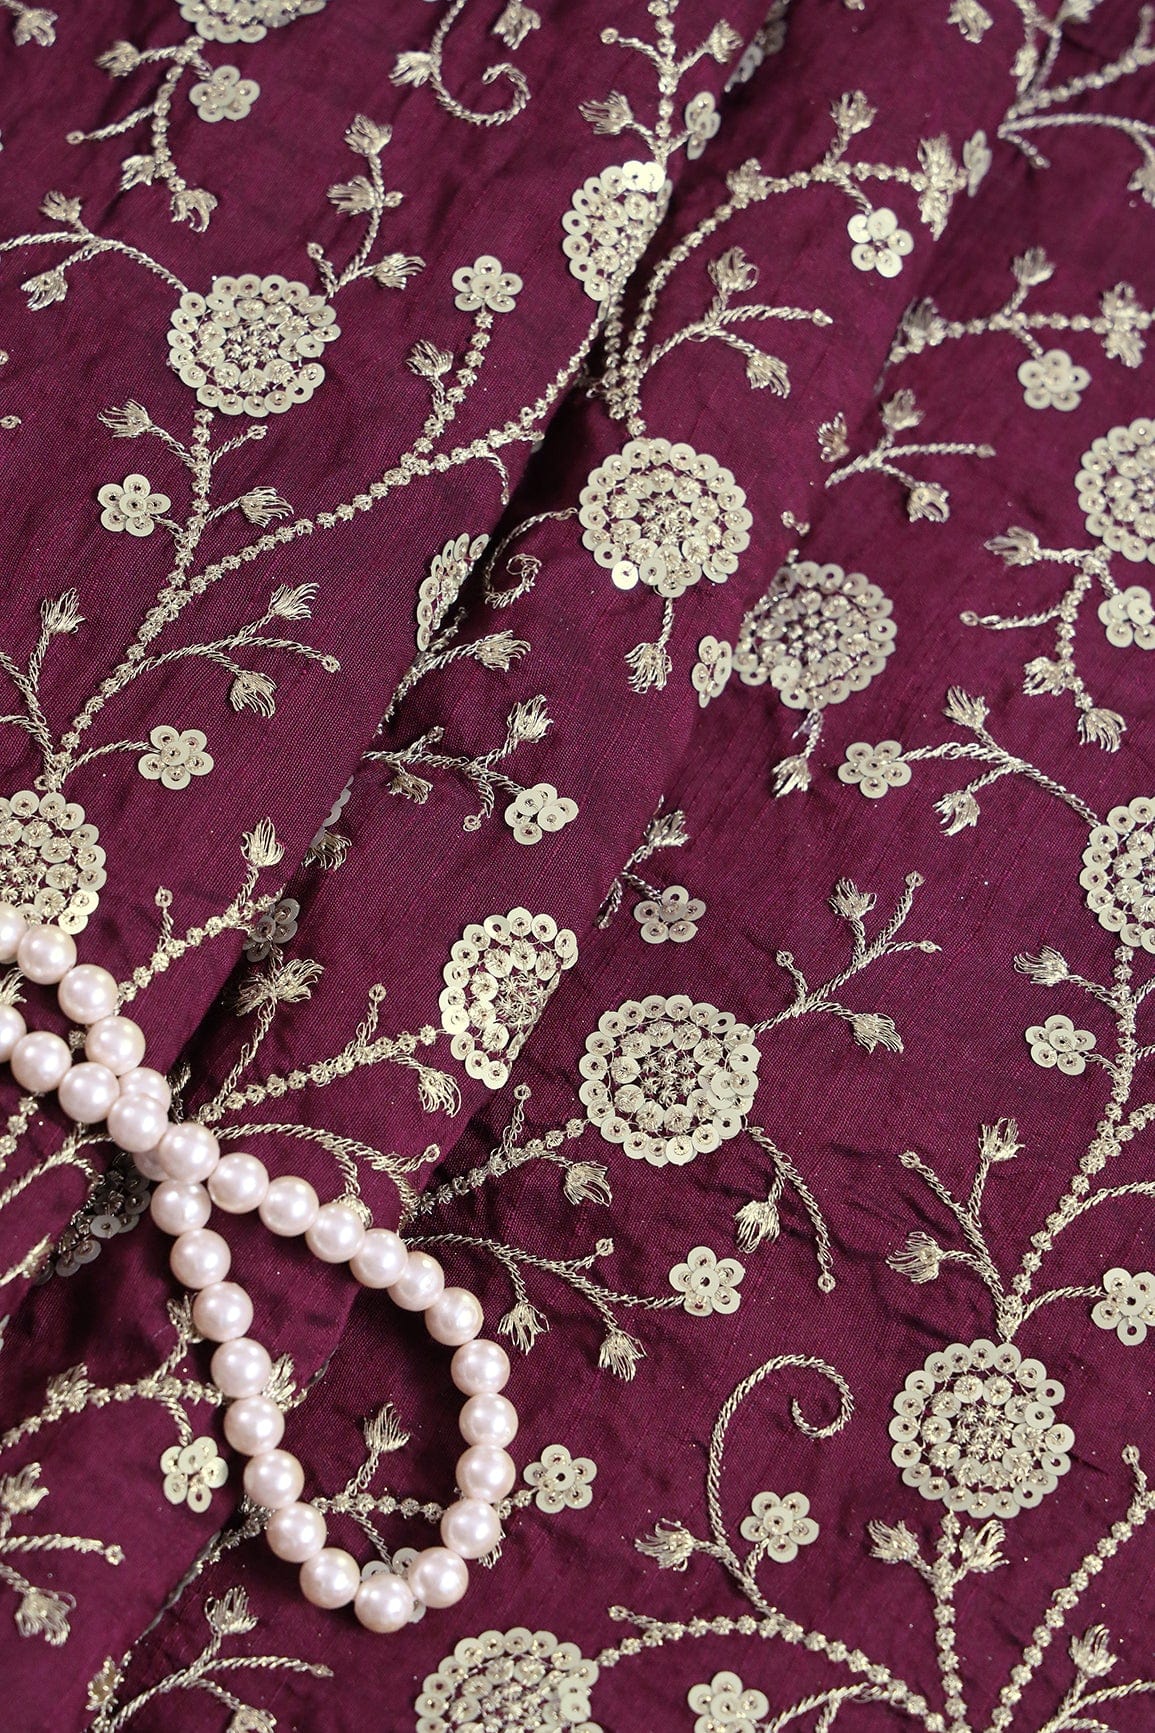 doeraa Embroidery Fabrics Gold Zari With Gold Sequins Beautiful Floral Embroidery Work On Wine Raw Silk Fabric